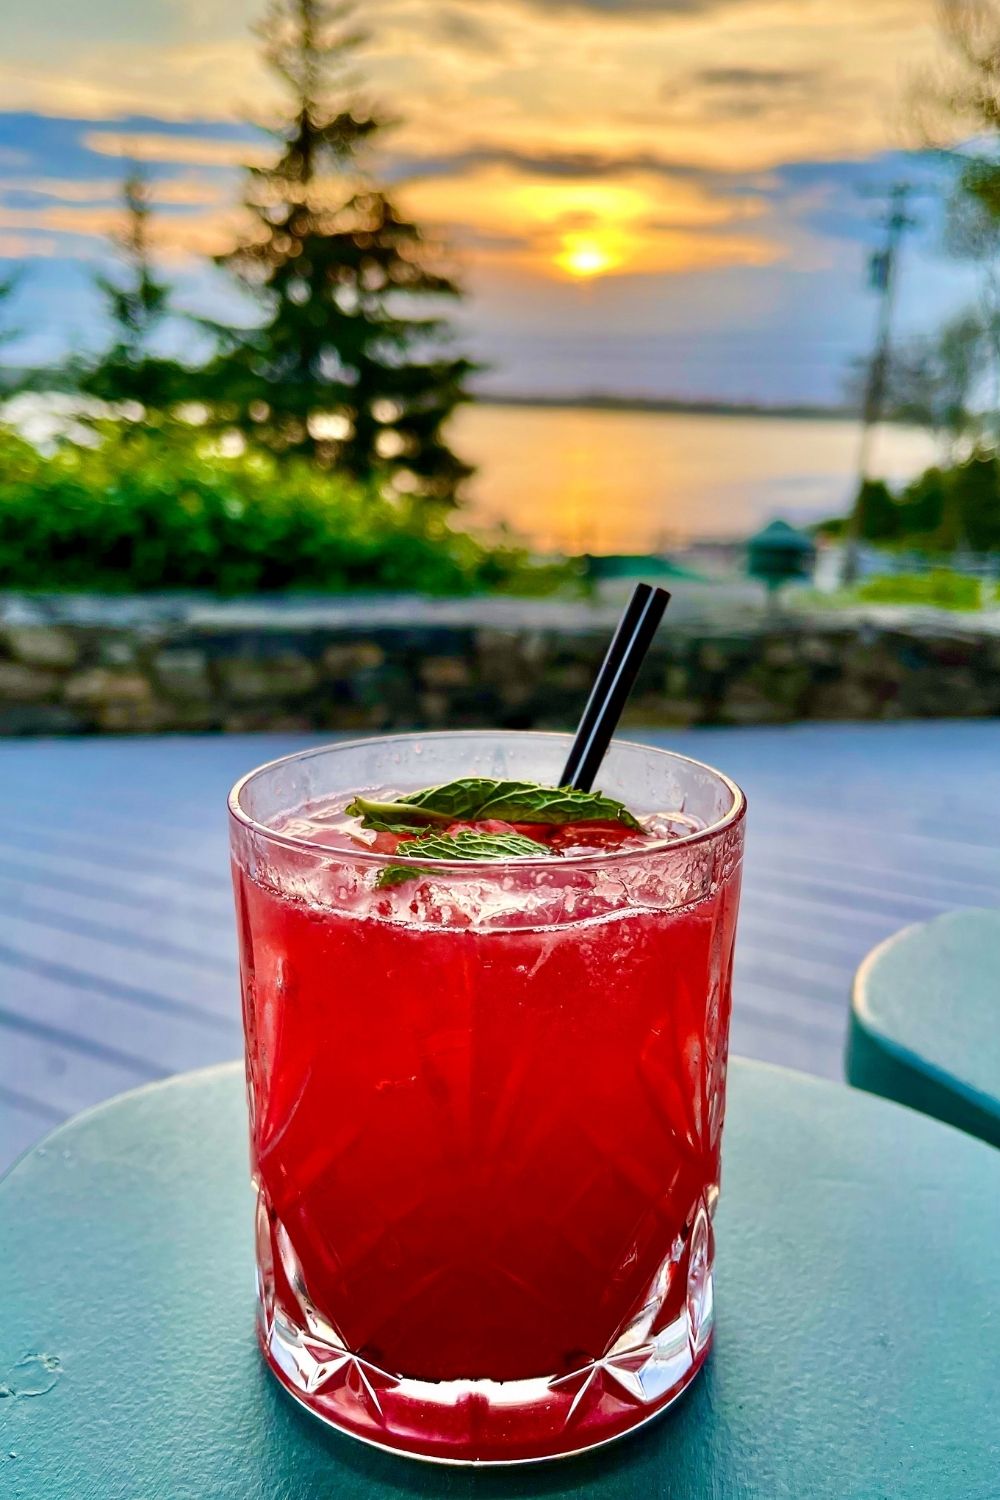 Spruce Point Inn in Boothbay Harbor, Maine